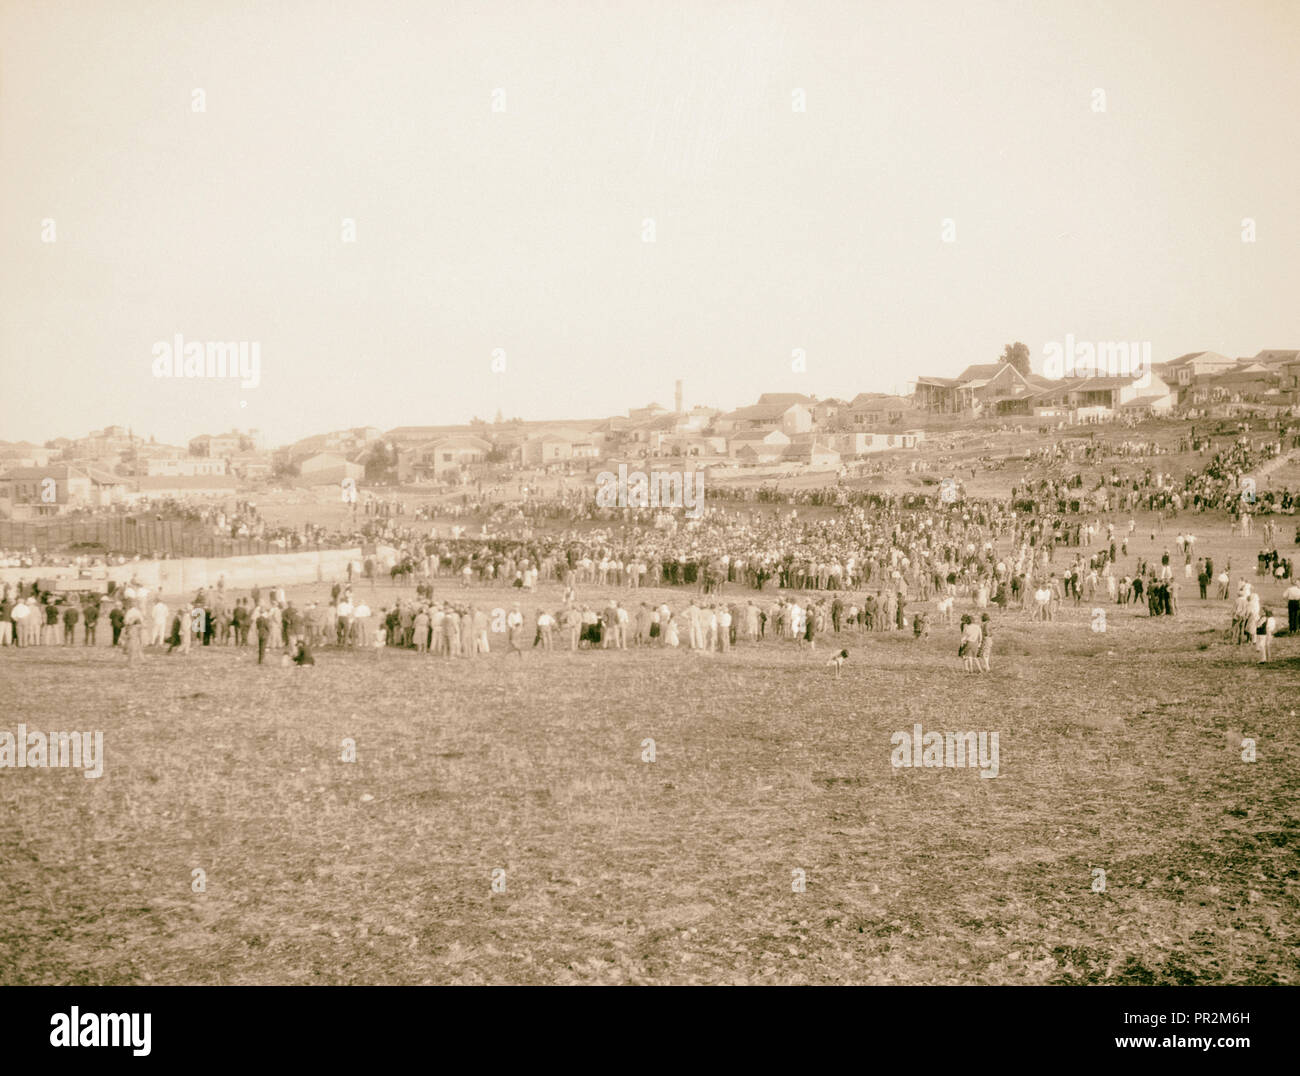 Maccabee football game on sports grounds near el-Bokharbia. 1934, Middle East, Israel and/or Palestine Stock Photo